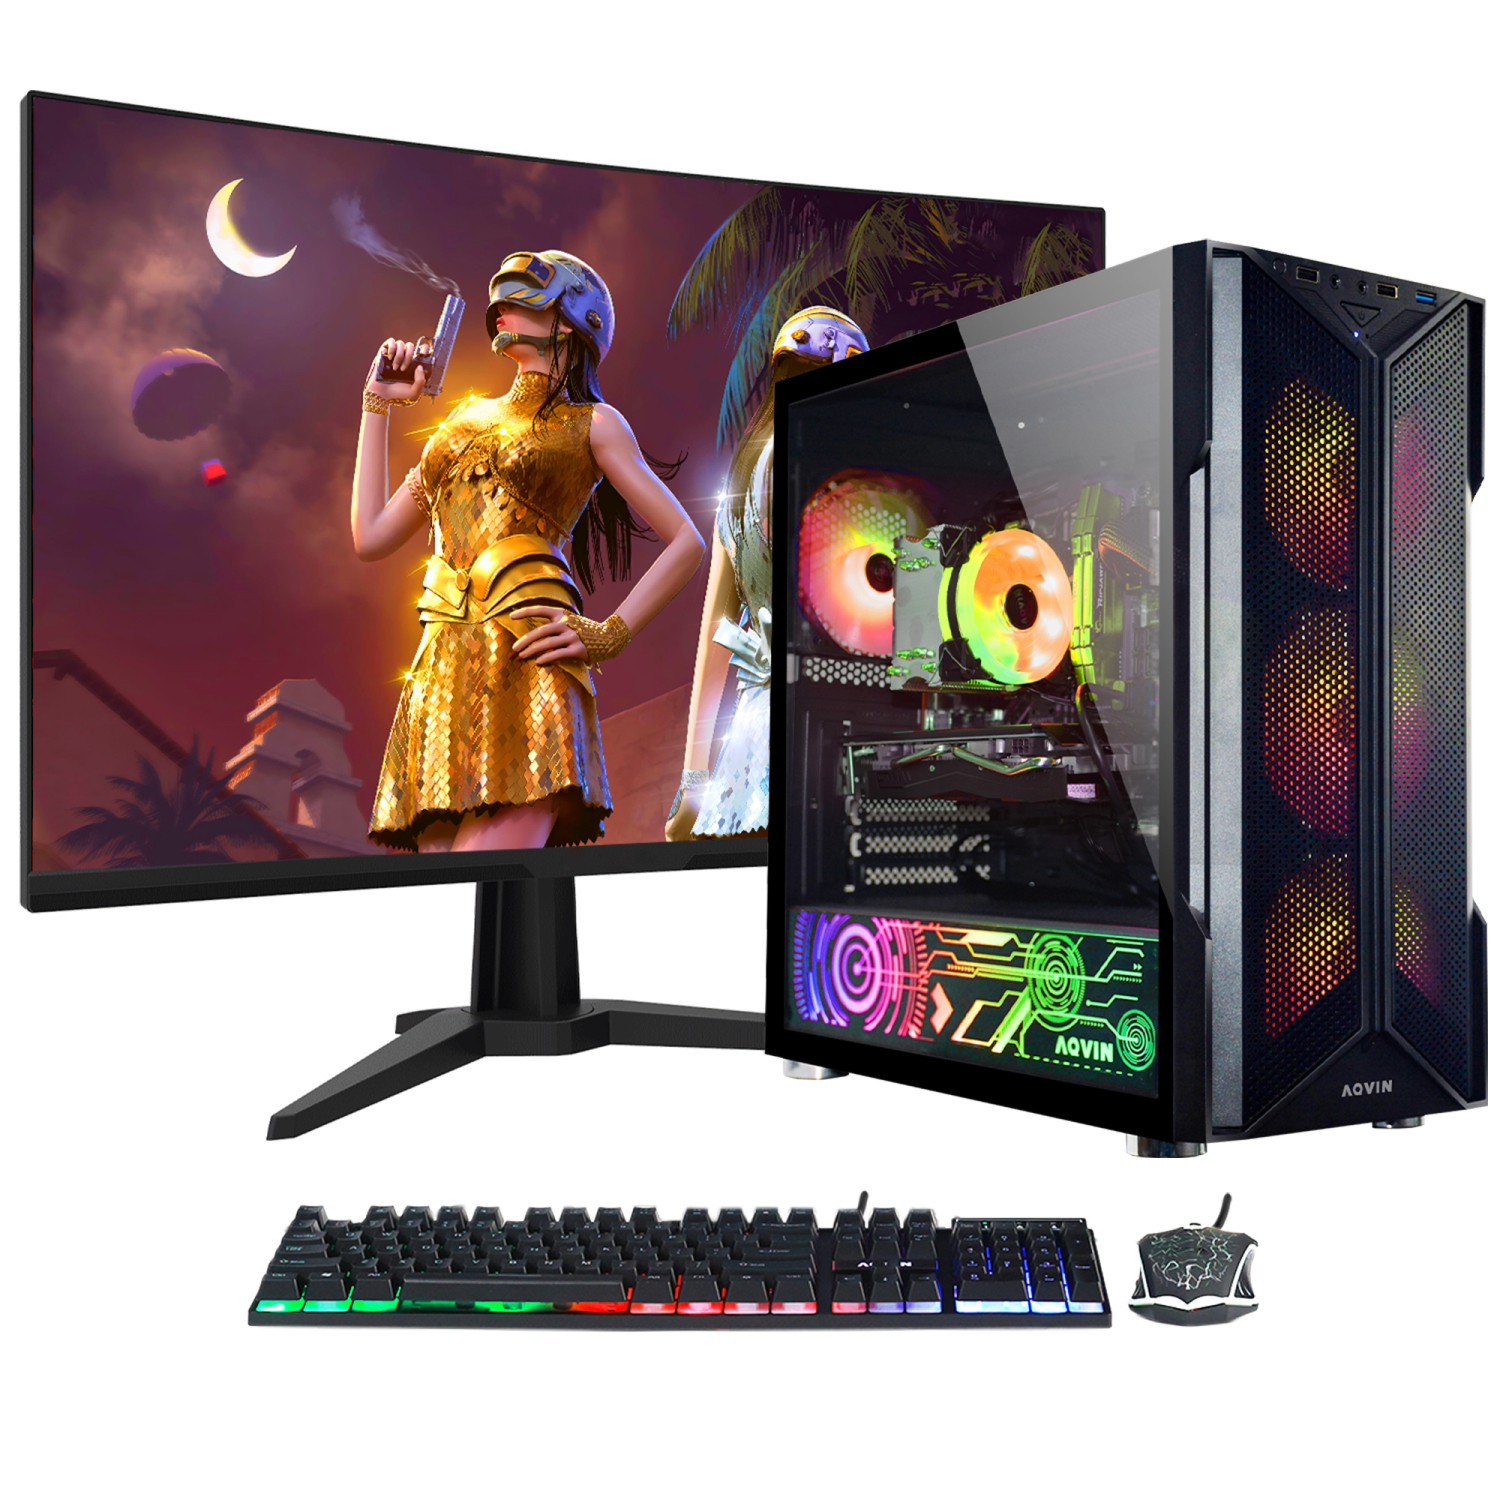 Gaming PC AQVIN-AQ20 Desktop Computer Tower - New 24 inch Curved Gaming Monitor (Intel Core i7/ 32GB DDR4 RAM/ 1TB SSD/ GeForce RTX 3060 12GB/ Windows 10 Pro) - Only at Best Buy